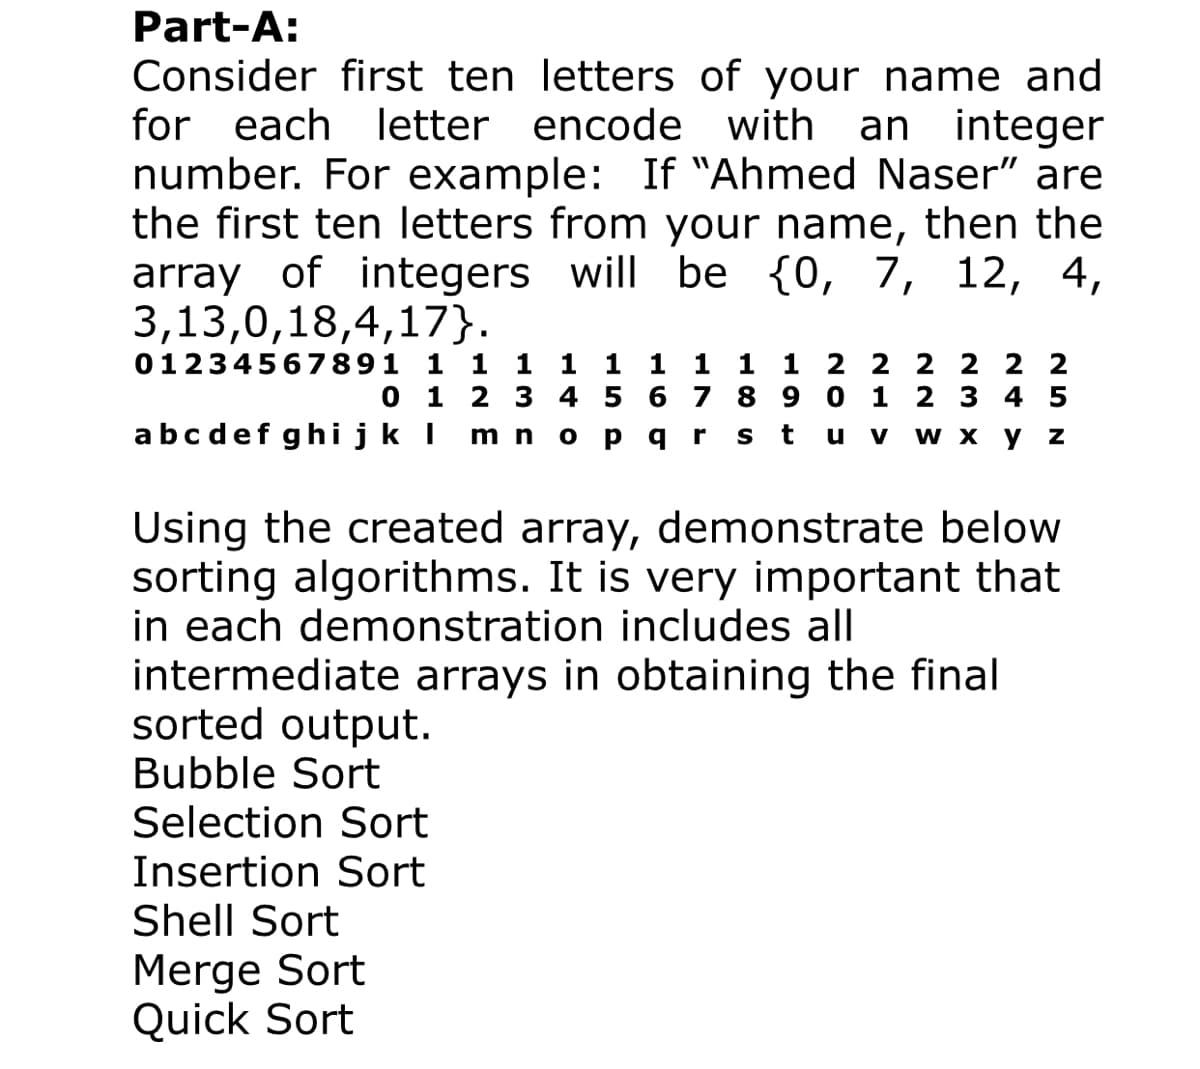 Part-A:
Consider first ten letters of your name and
for each letter
encode with
an integer
number. For example: If "Ahmed Naser" are
the first ten letters from your name, then the
array of integers will be {0, 7, 12, 4,
3,13,0,18,4,17}.
01234567891 1 1 1 1 1 1 1 1 1 2 2 2 2 2 2
0 1
2 3 4 5
6 7 8 9
1
2 3 4 5
abcdef ghijk I
t
wx у Z
m n
ра
S
u
V
Using the created array, demonstrate below
sorting algorithms. It is very important that
in each demonstration includes all
intermediate arrays in obtaining the final
sorted output.
Bubble Sort
Selection Sort
Insertion Sort
Shell Sort
Merge Sort
Quick Sort
